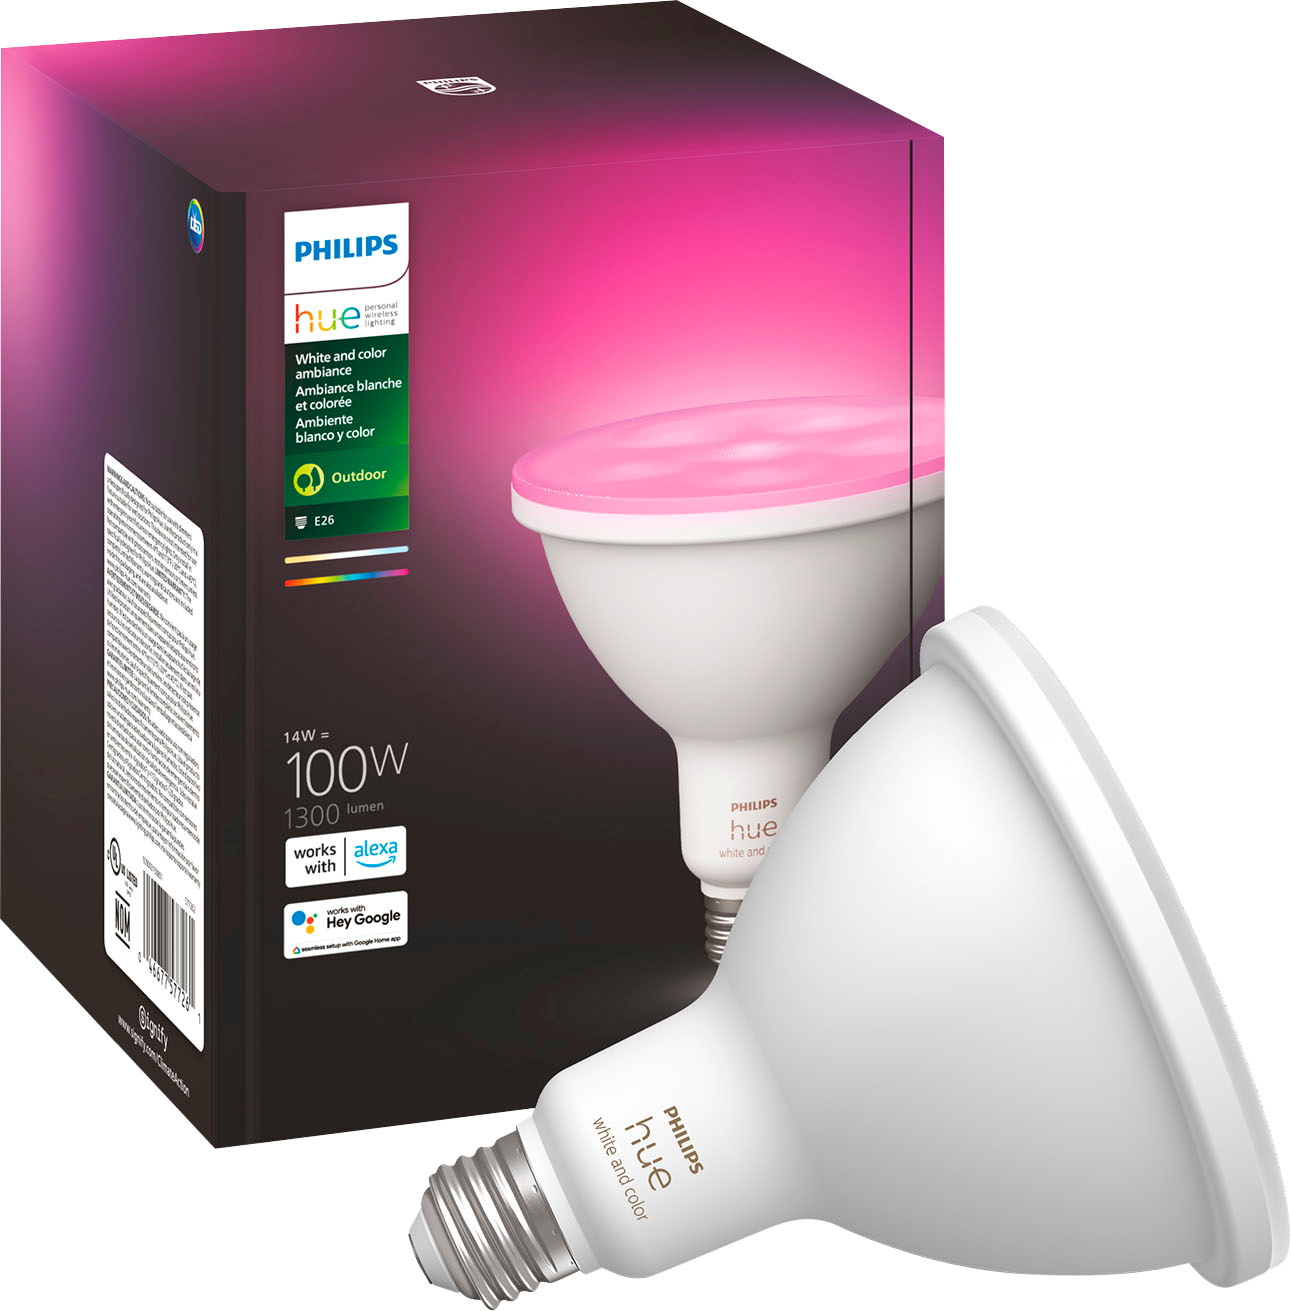 Philips Hue PAR38 100W Smart LED Bulb White and Color Ambiance